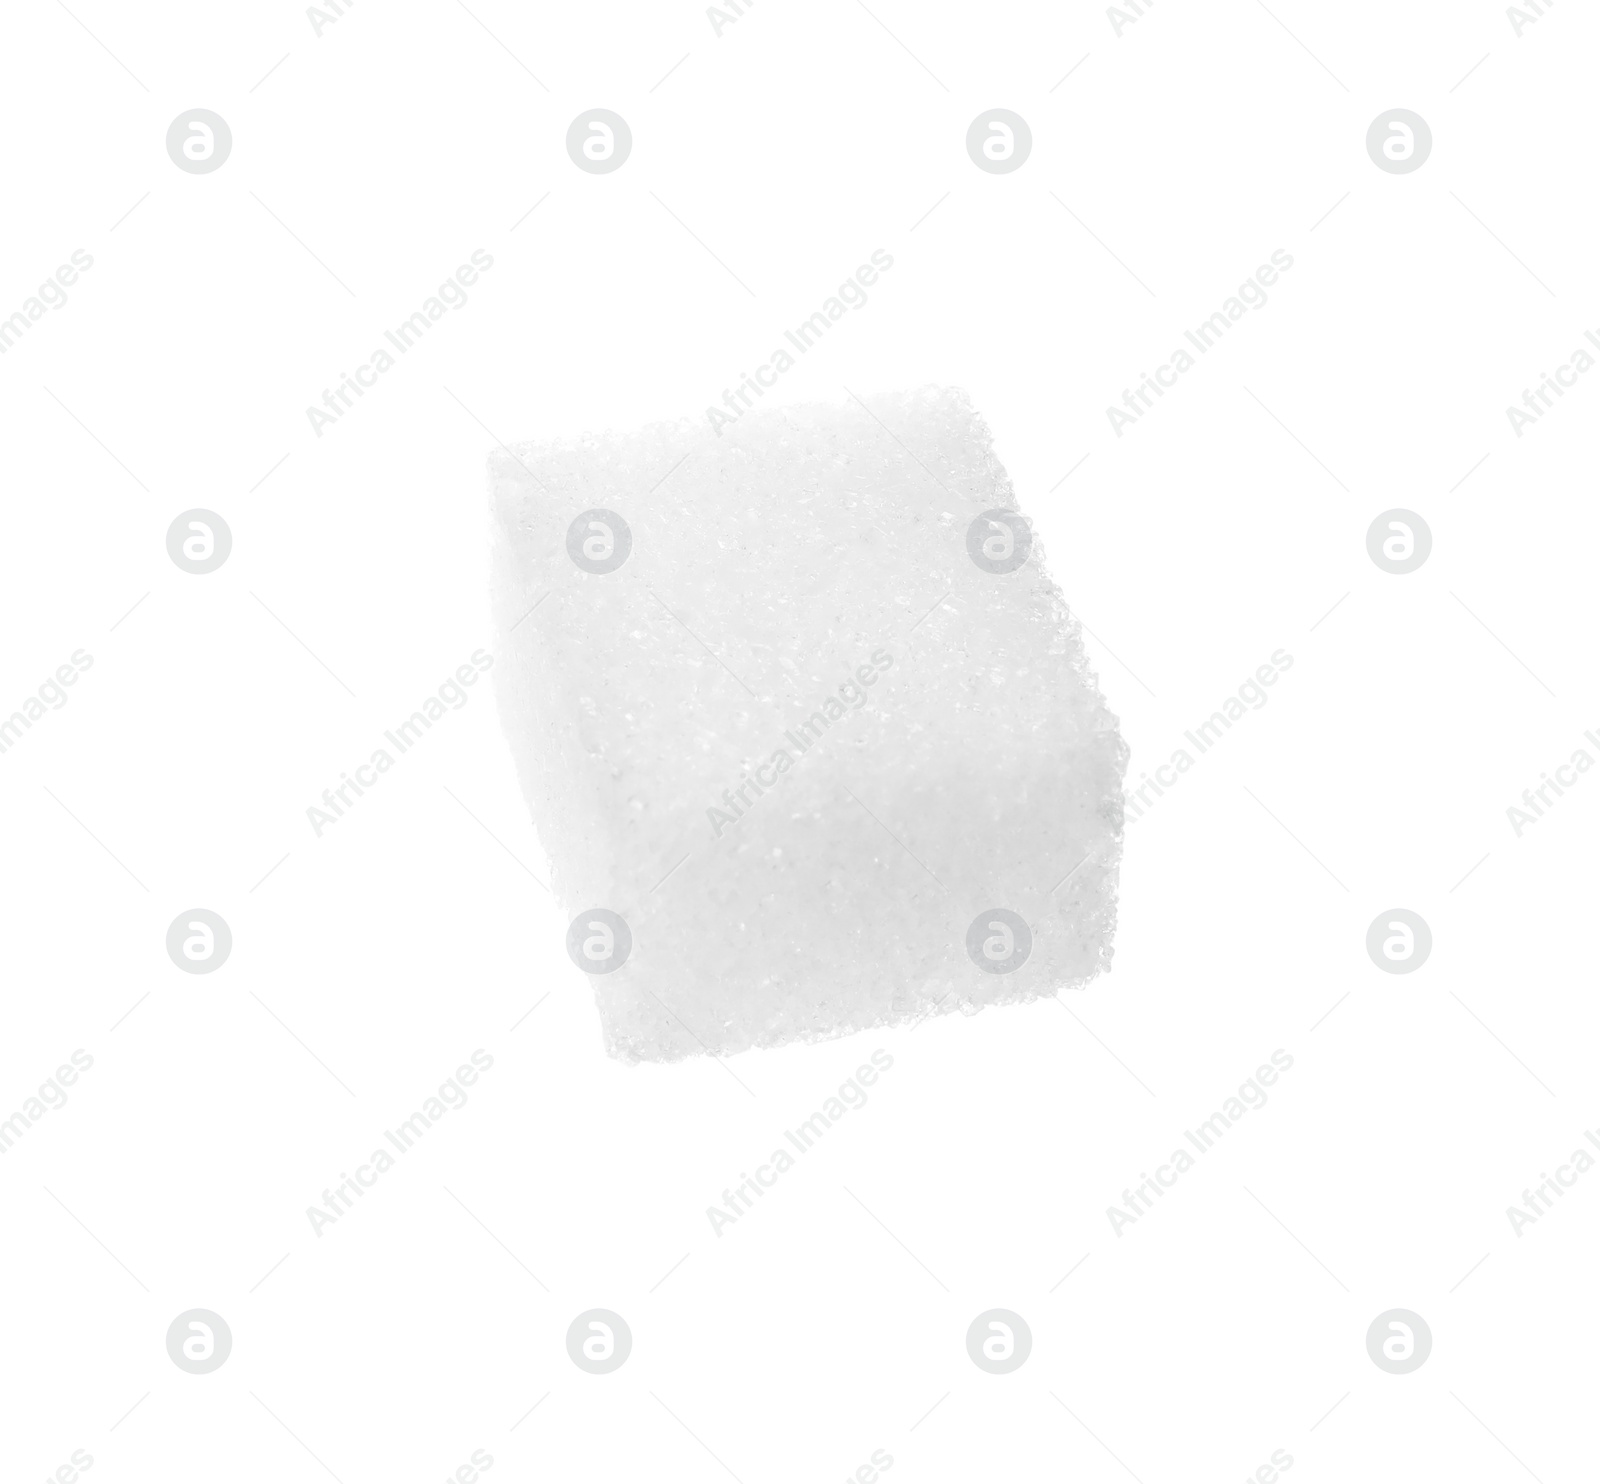 Photo of One refined sugar cube isolated on white